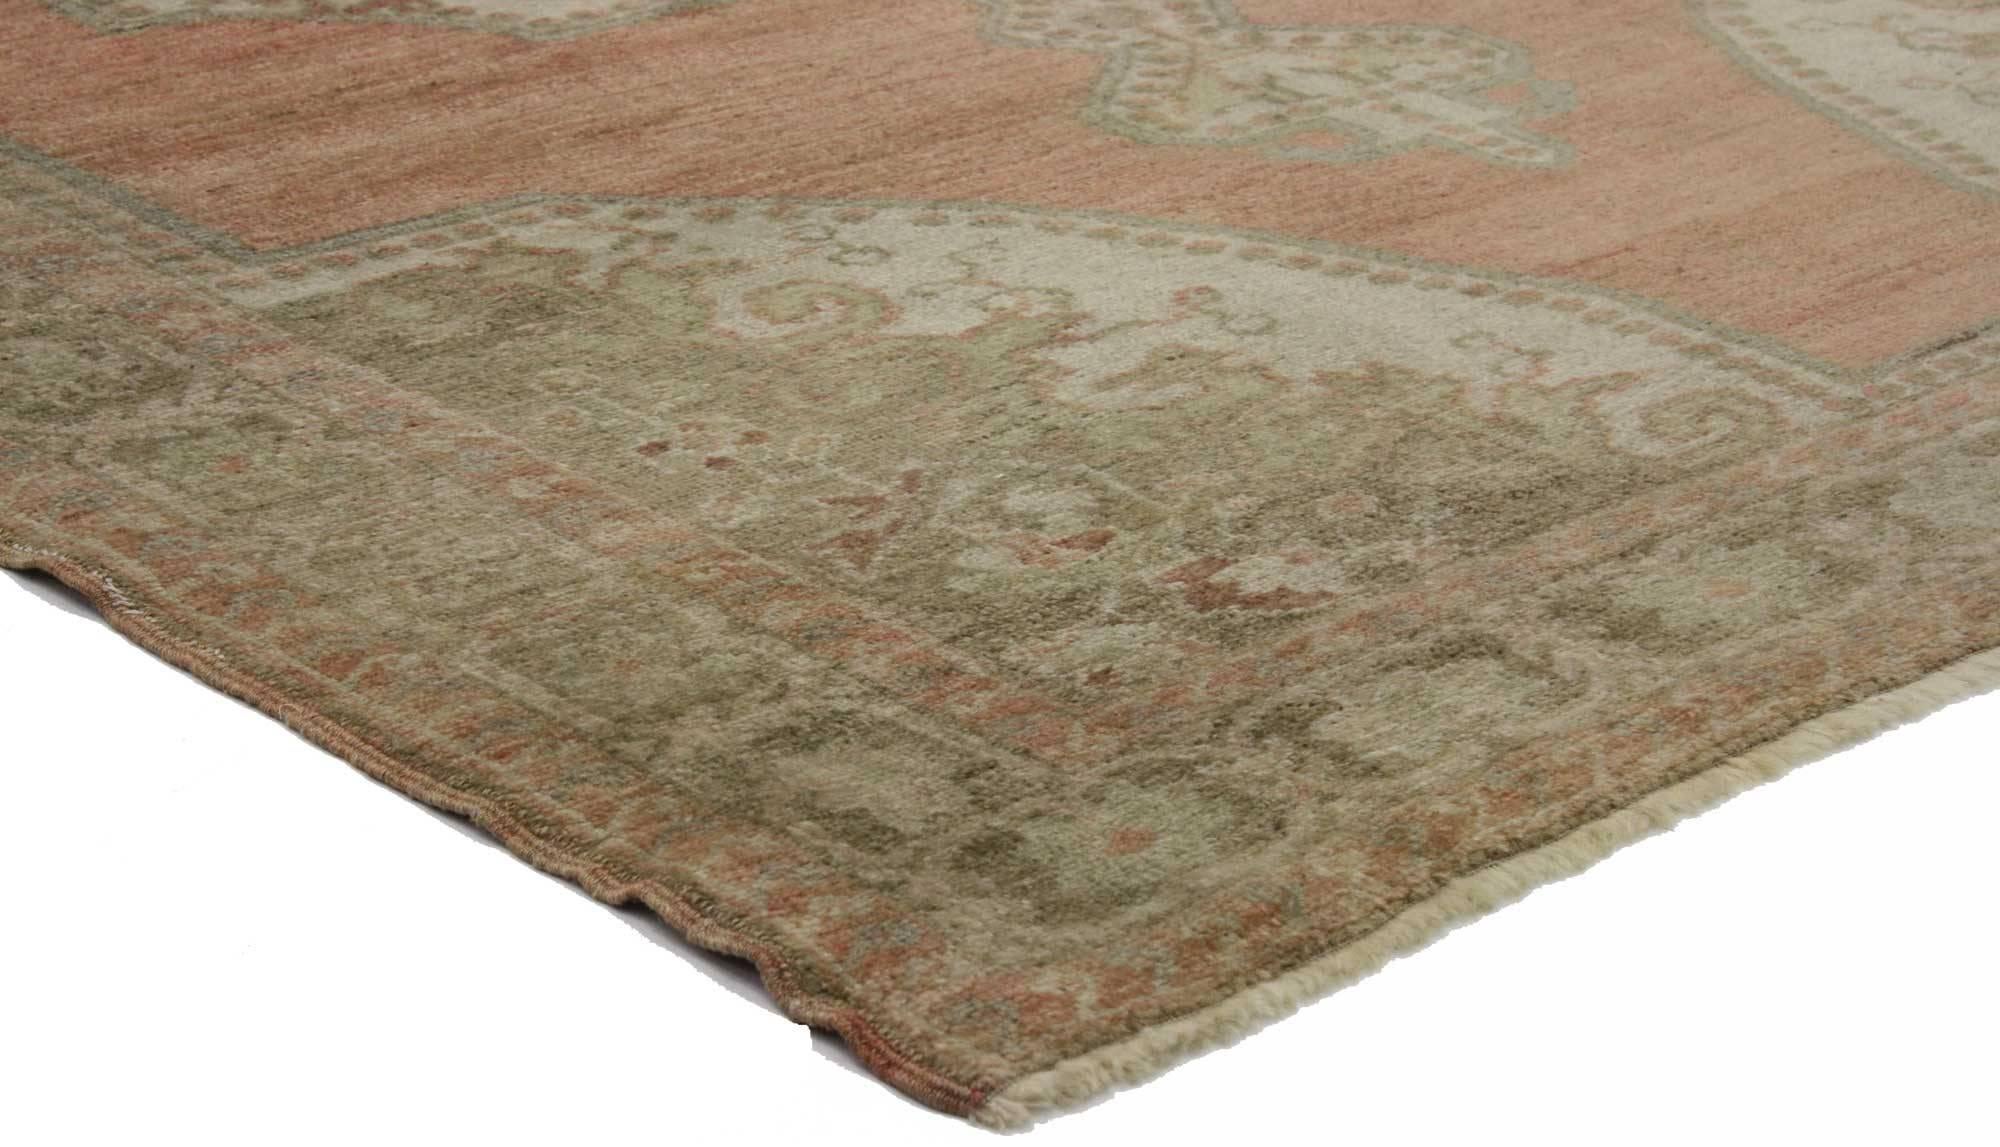 74743, a vintage Turkish Oushak accent rug. This traditional style Turkish Oushak accent rug features a large-scale, ornate central medallion. The medallion is flanked with two cartouche finials and floats in a sea of rich abrashed waves. Spandrels